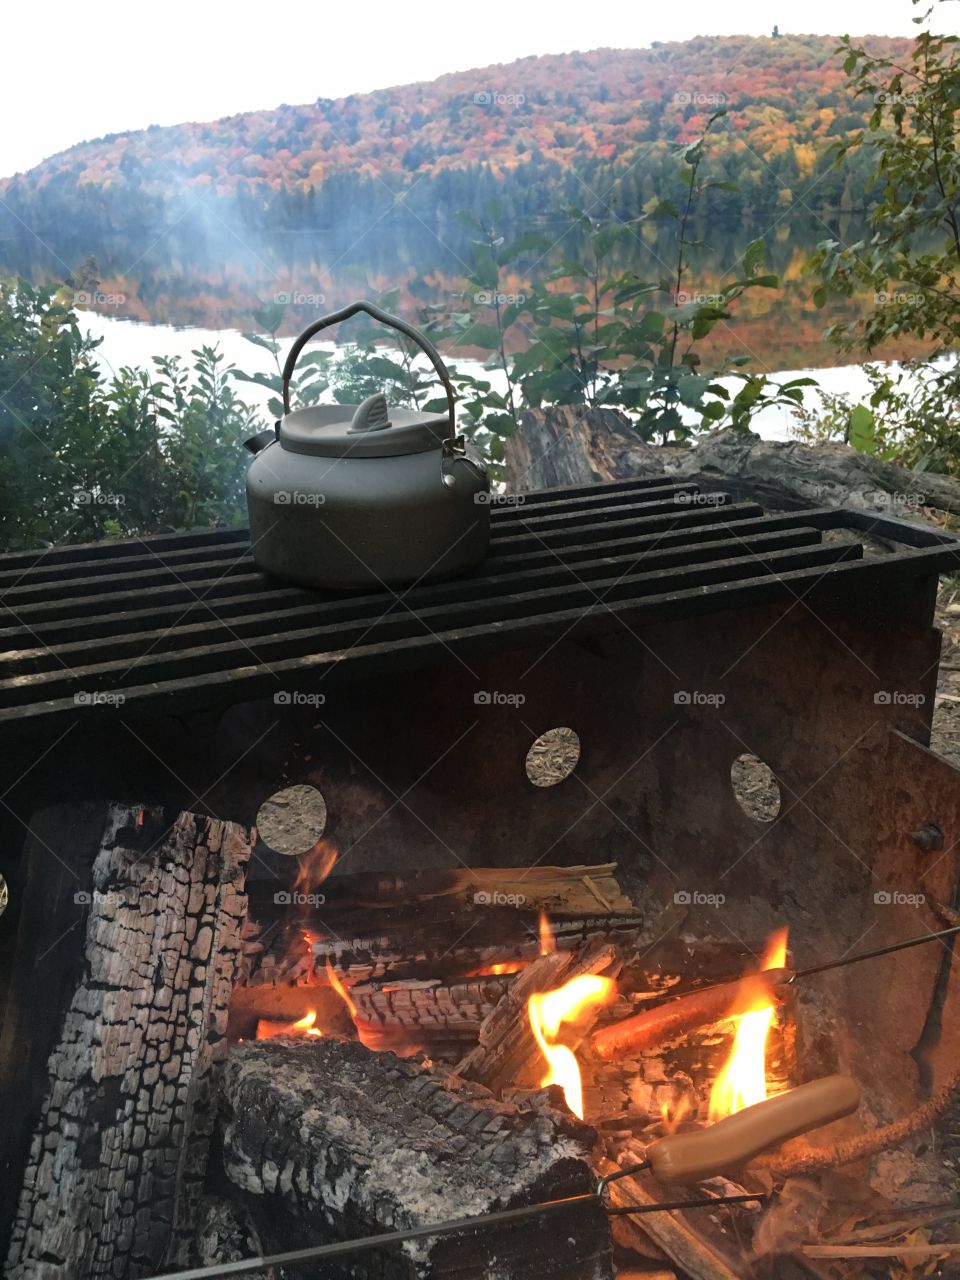 Making campfire roasted hot dogs and tea on a camping trip. 